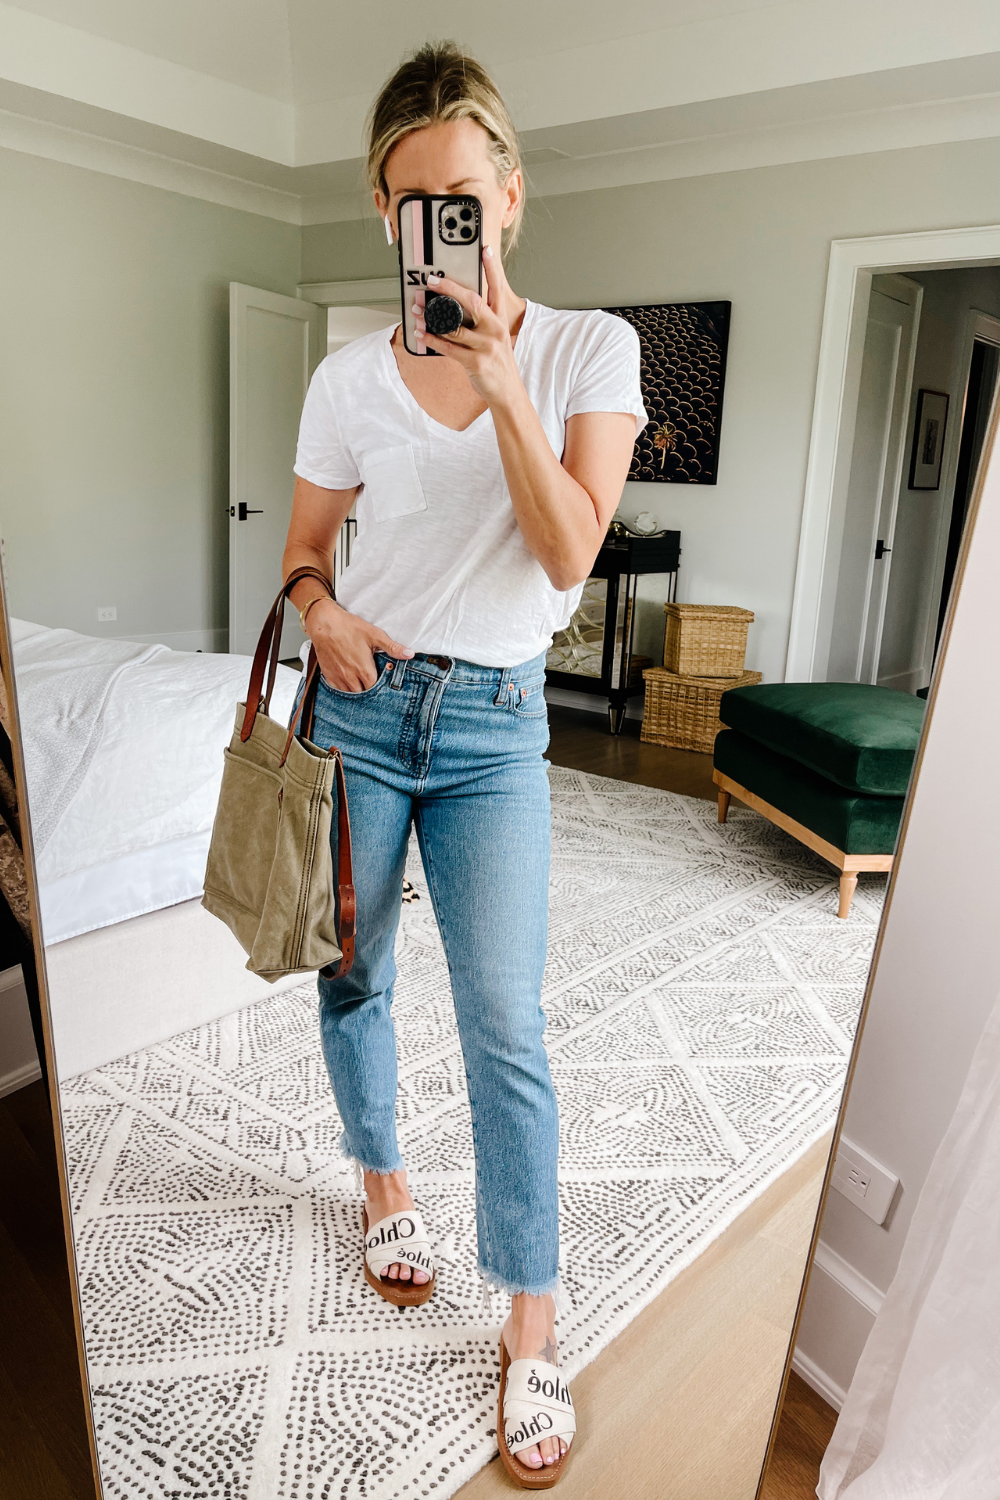 Suzanne wearing a white t-shirt and denim jeans